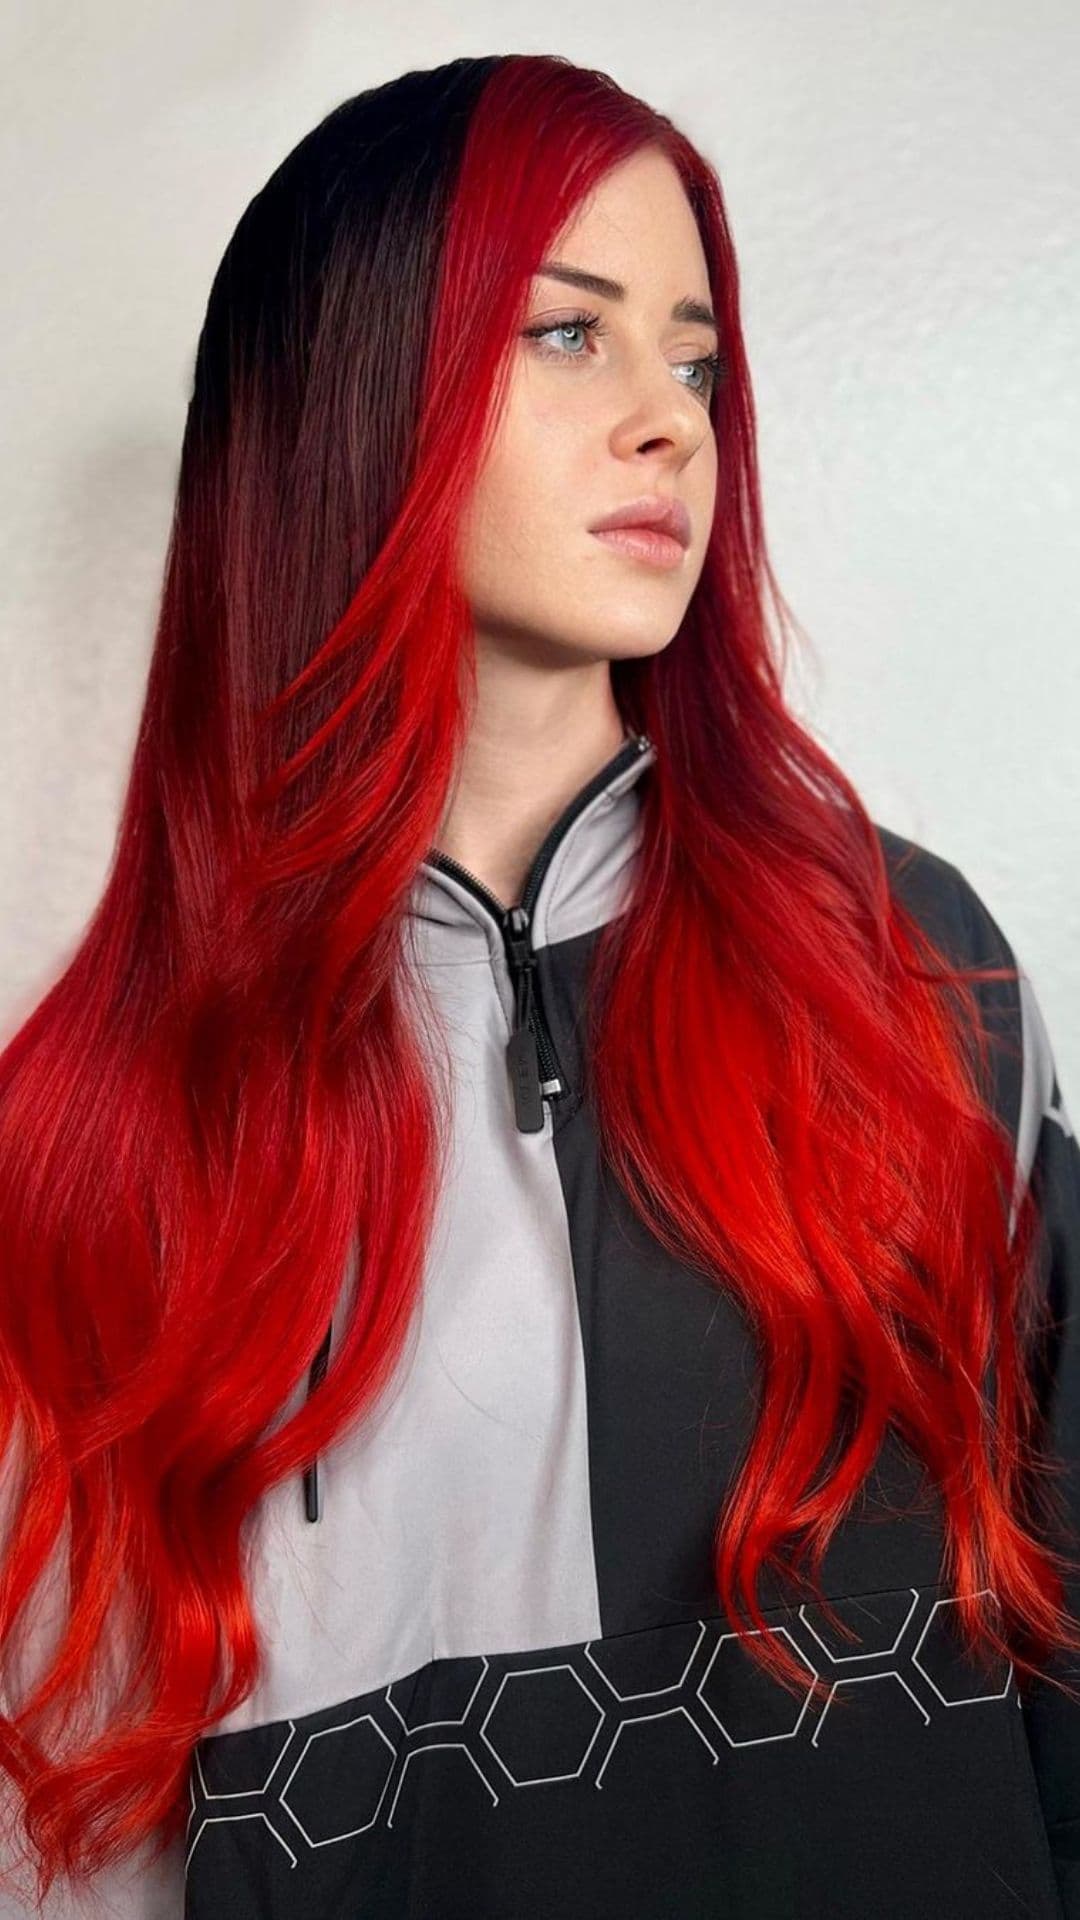 A woman with a red ombre hair.